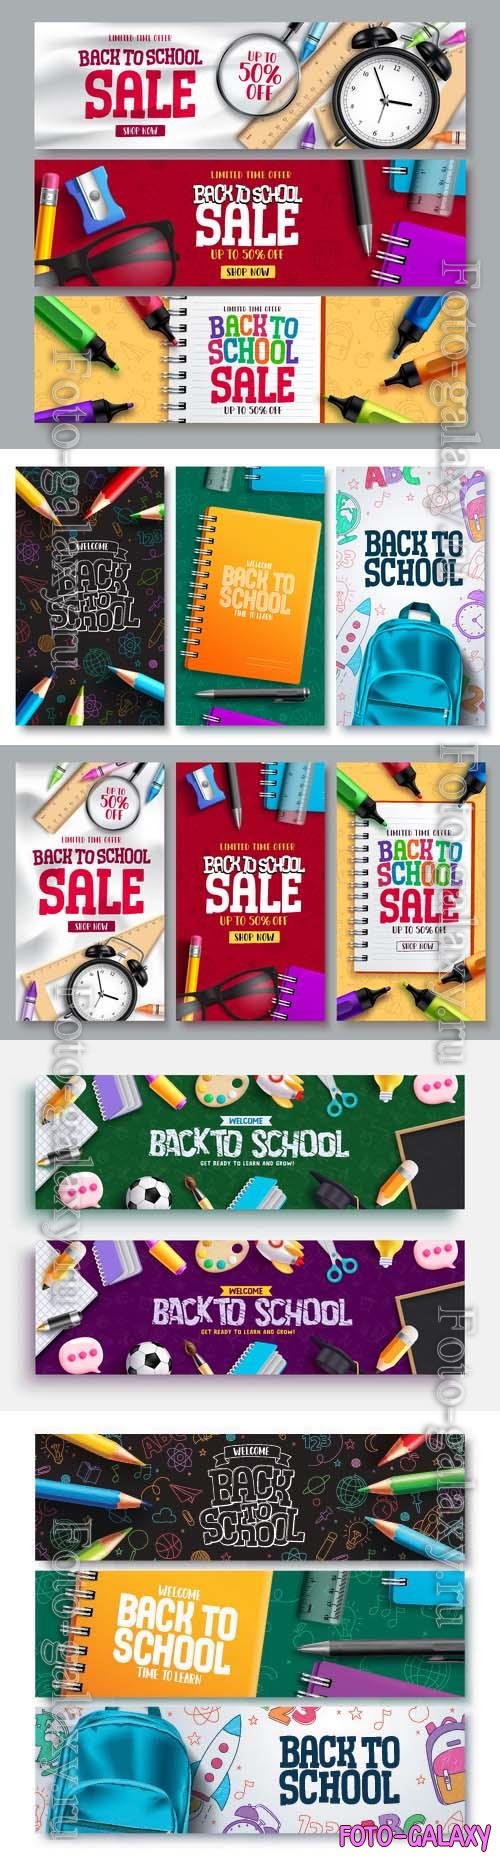 Back to school vector banner set design, back to school greeting text with kids educational